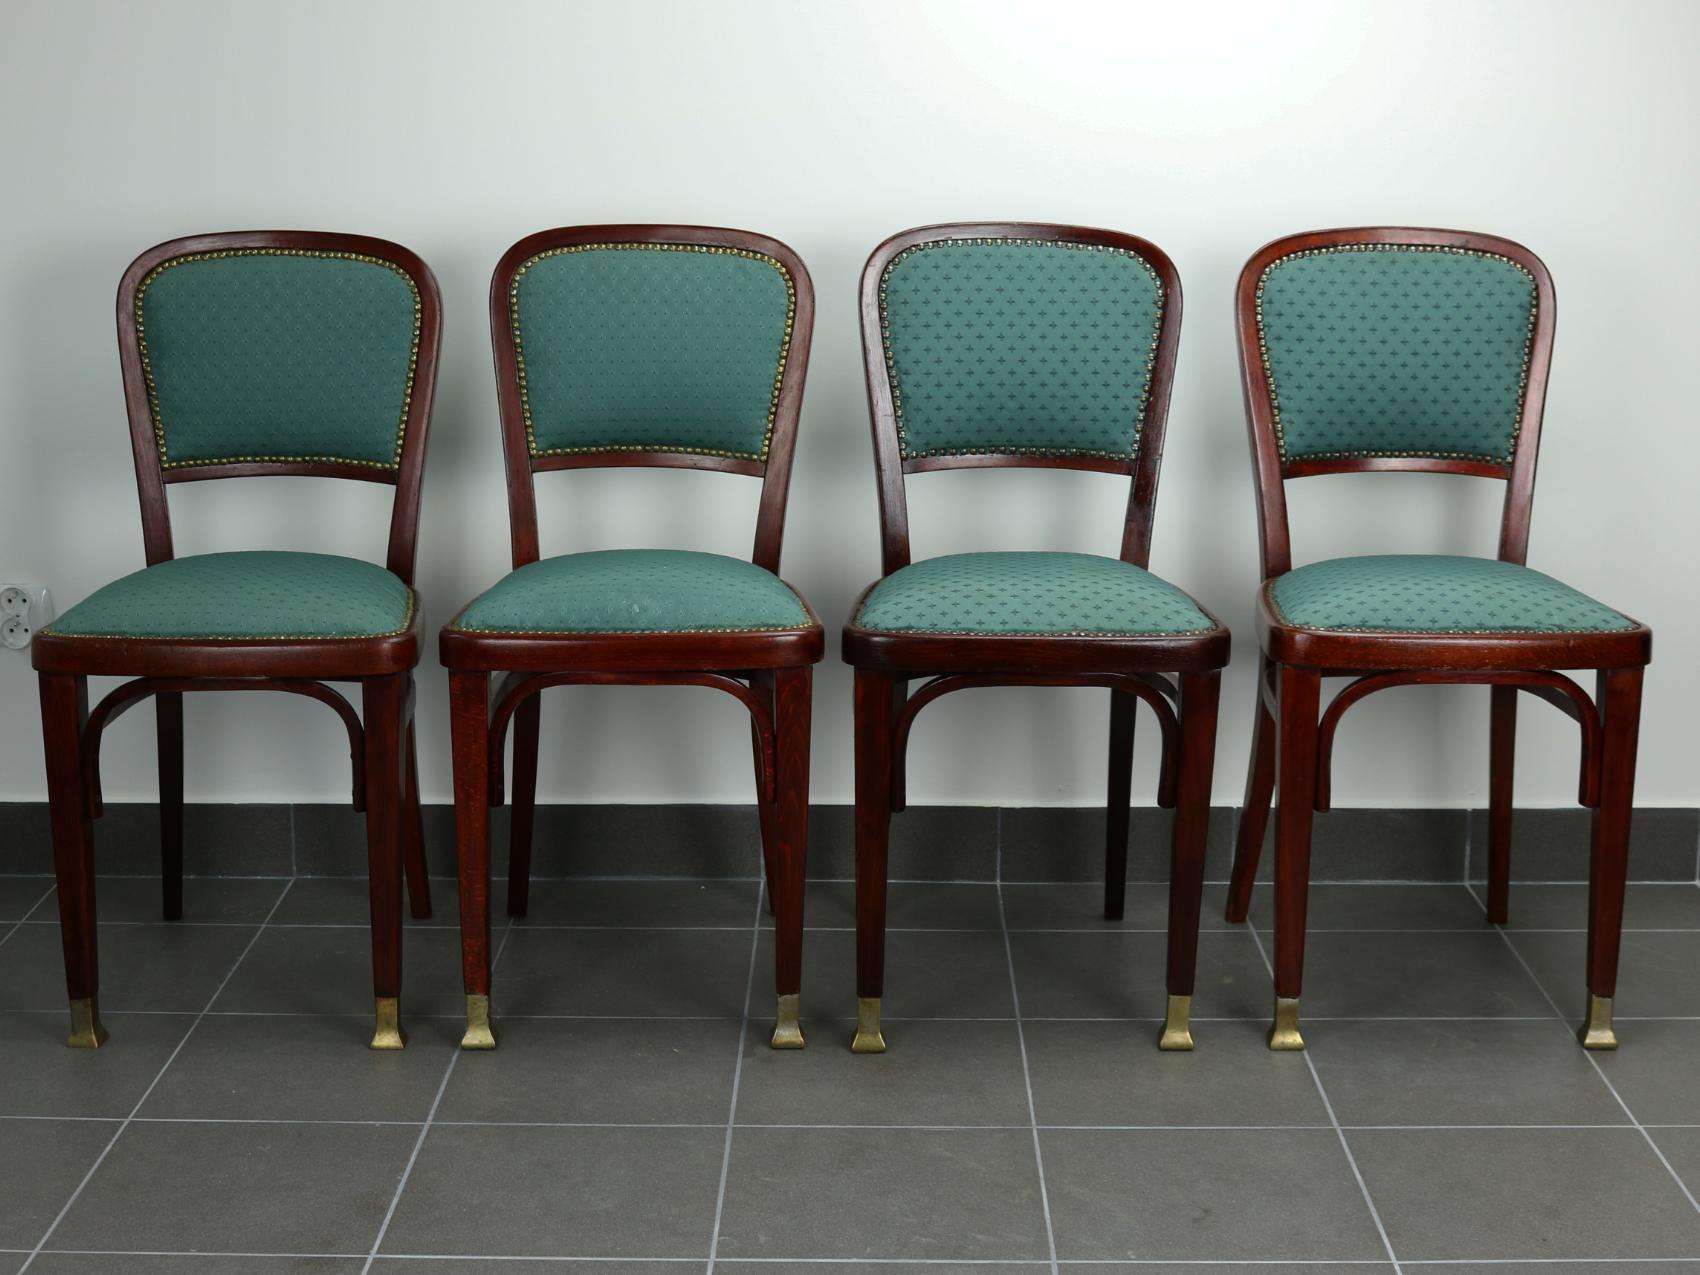 Vienna Secession Set of four chairs by Marcel Kammerer for Thonet, circa 1910